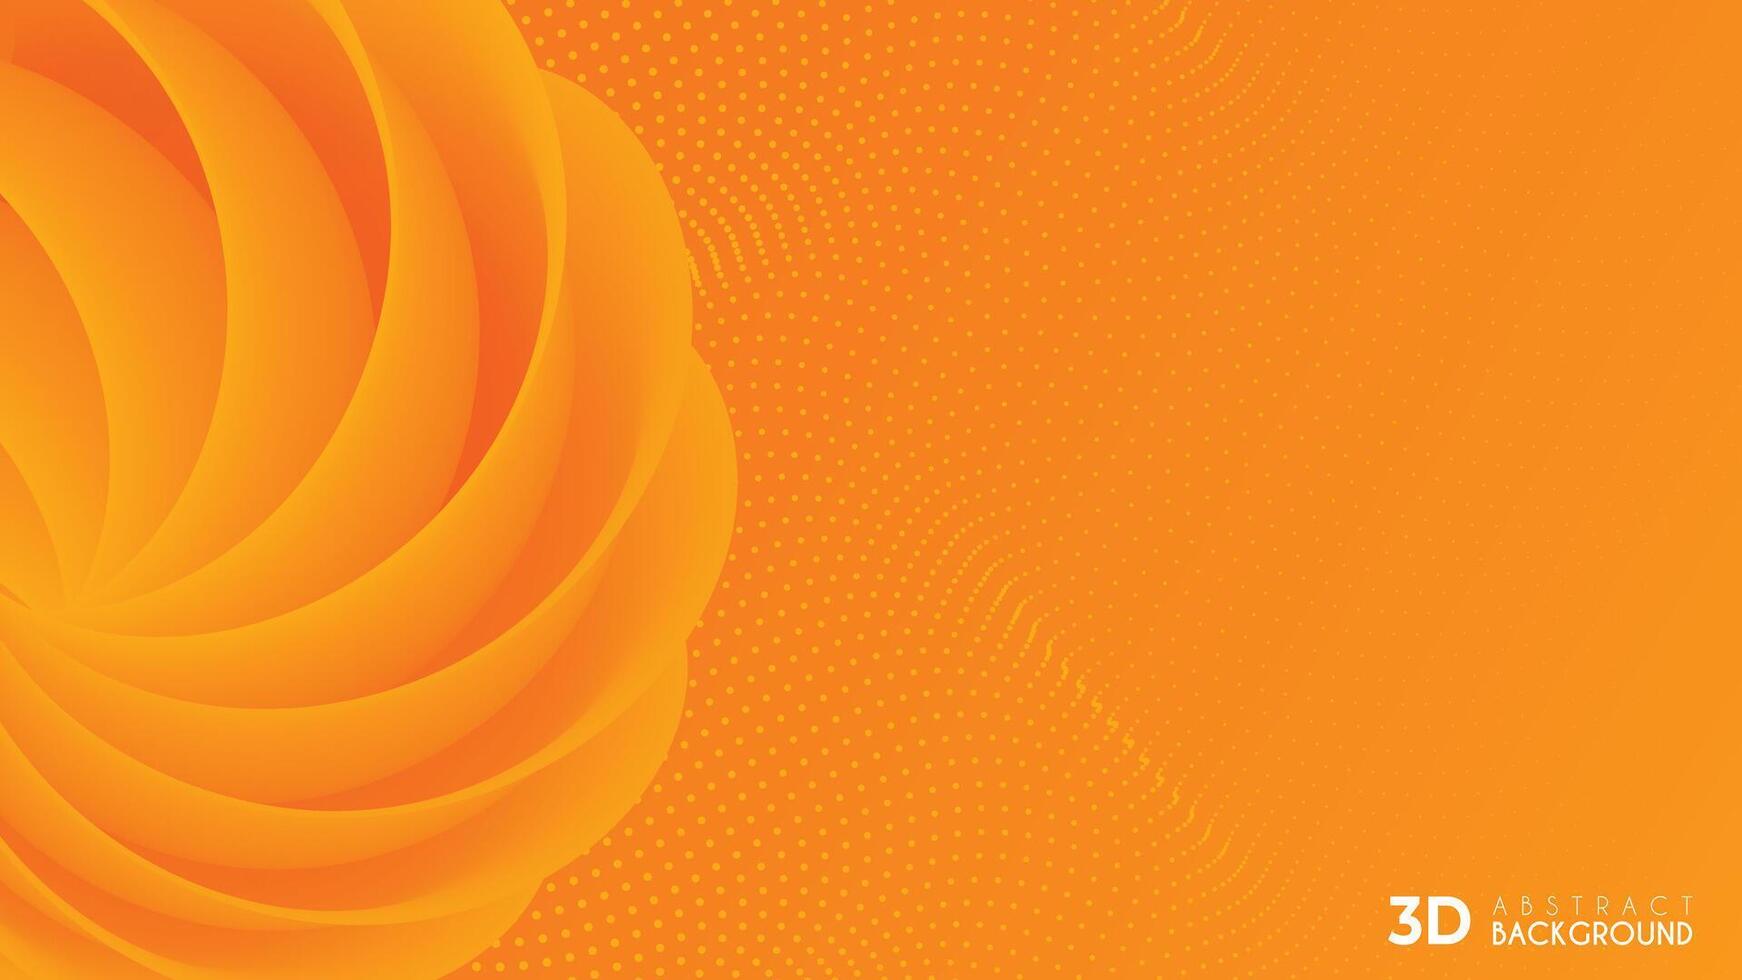 Dynamic style banner design from fruit concept. Orange elements with fluid gradient. Creative illustration for poster, web, landing, page, cover, ad, greeting, card, promotion. vector